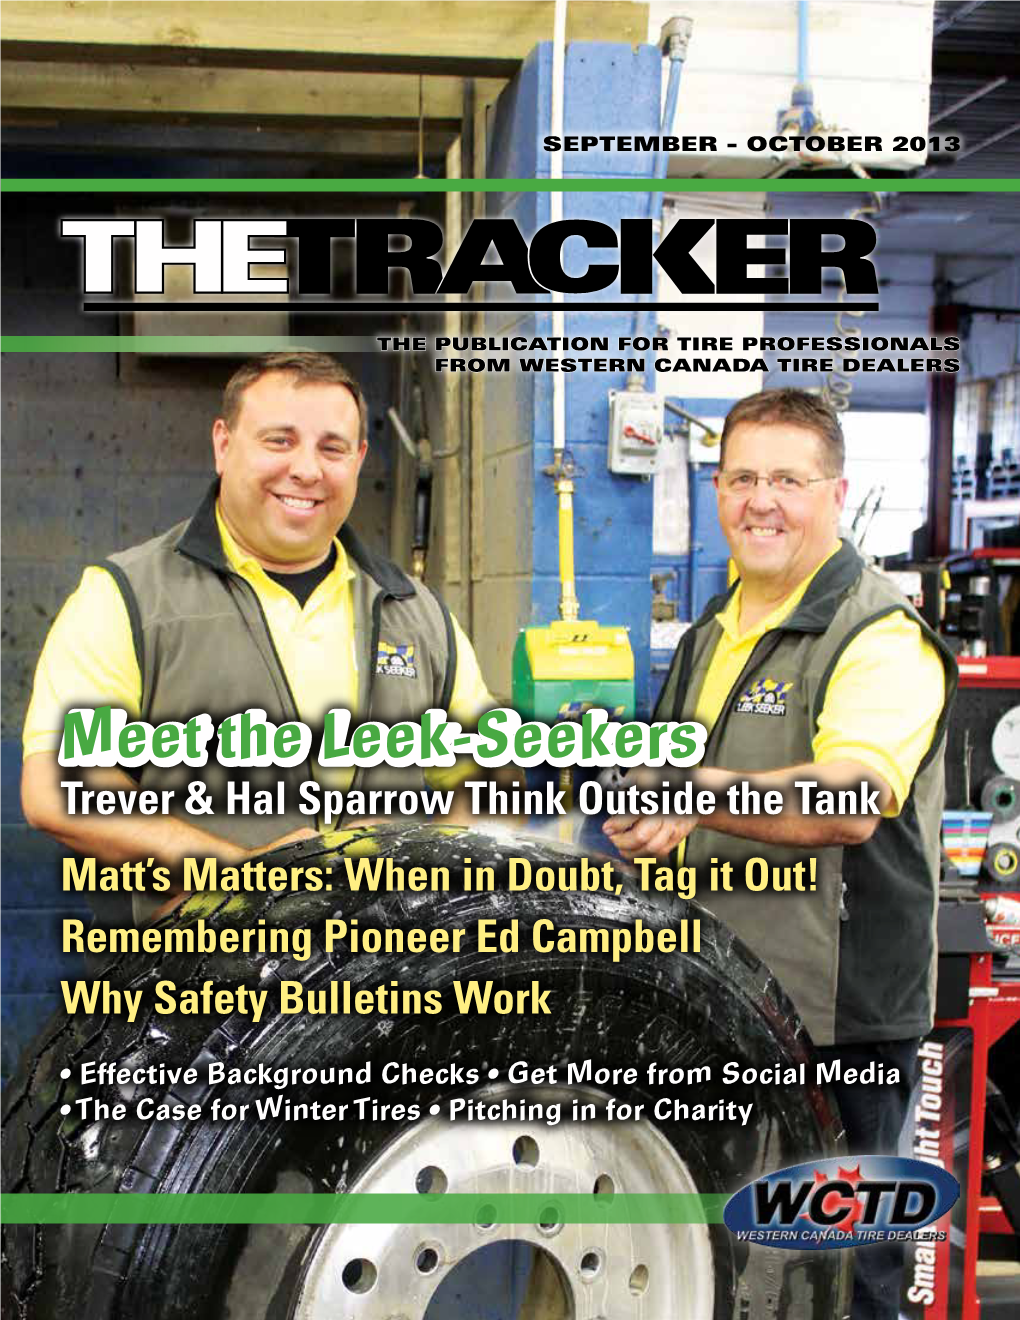 Meet the Leek-Seekers Trever & Hal Sparrow Think Outside the Tank Matt’S Matters: When in Doubt, Tag It Out! Remembering Pioneer Ed Campbell Why Safety Bulletins Work